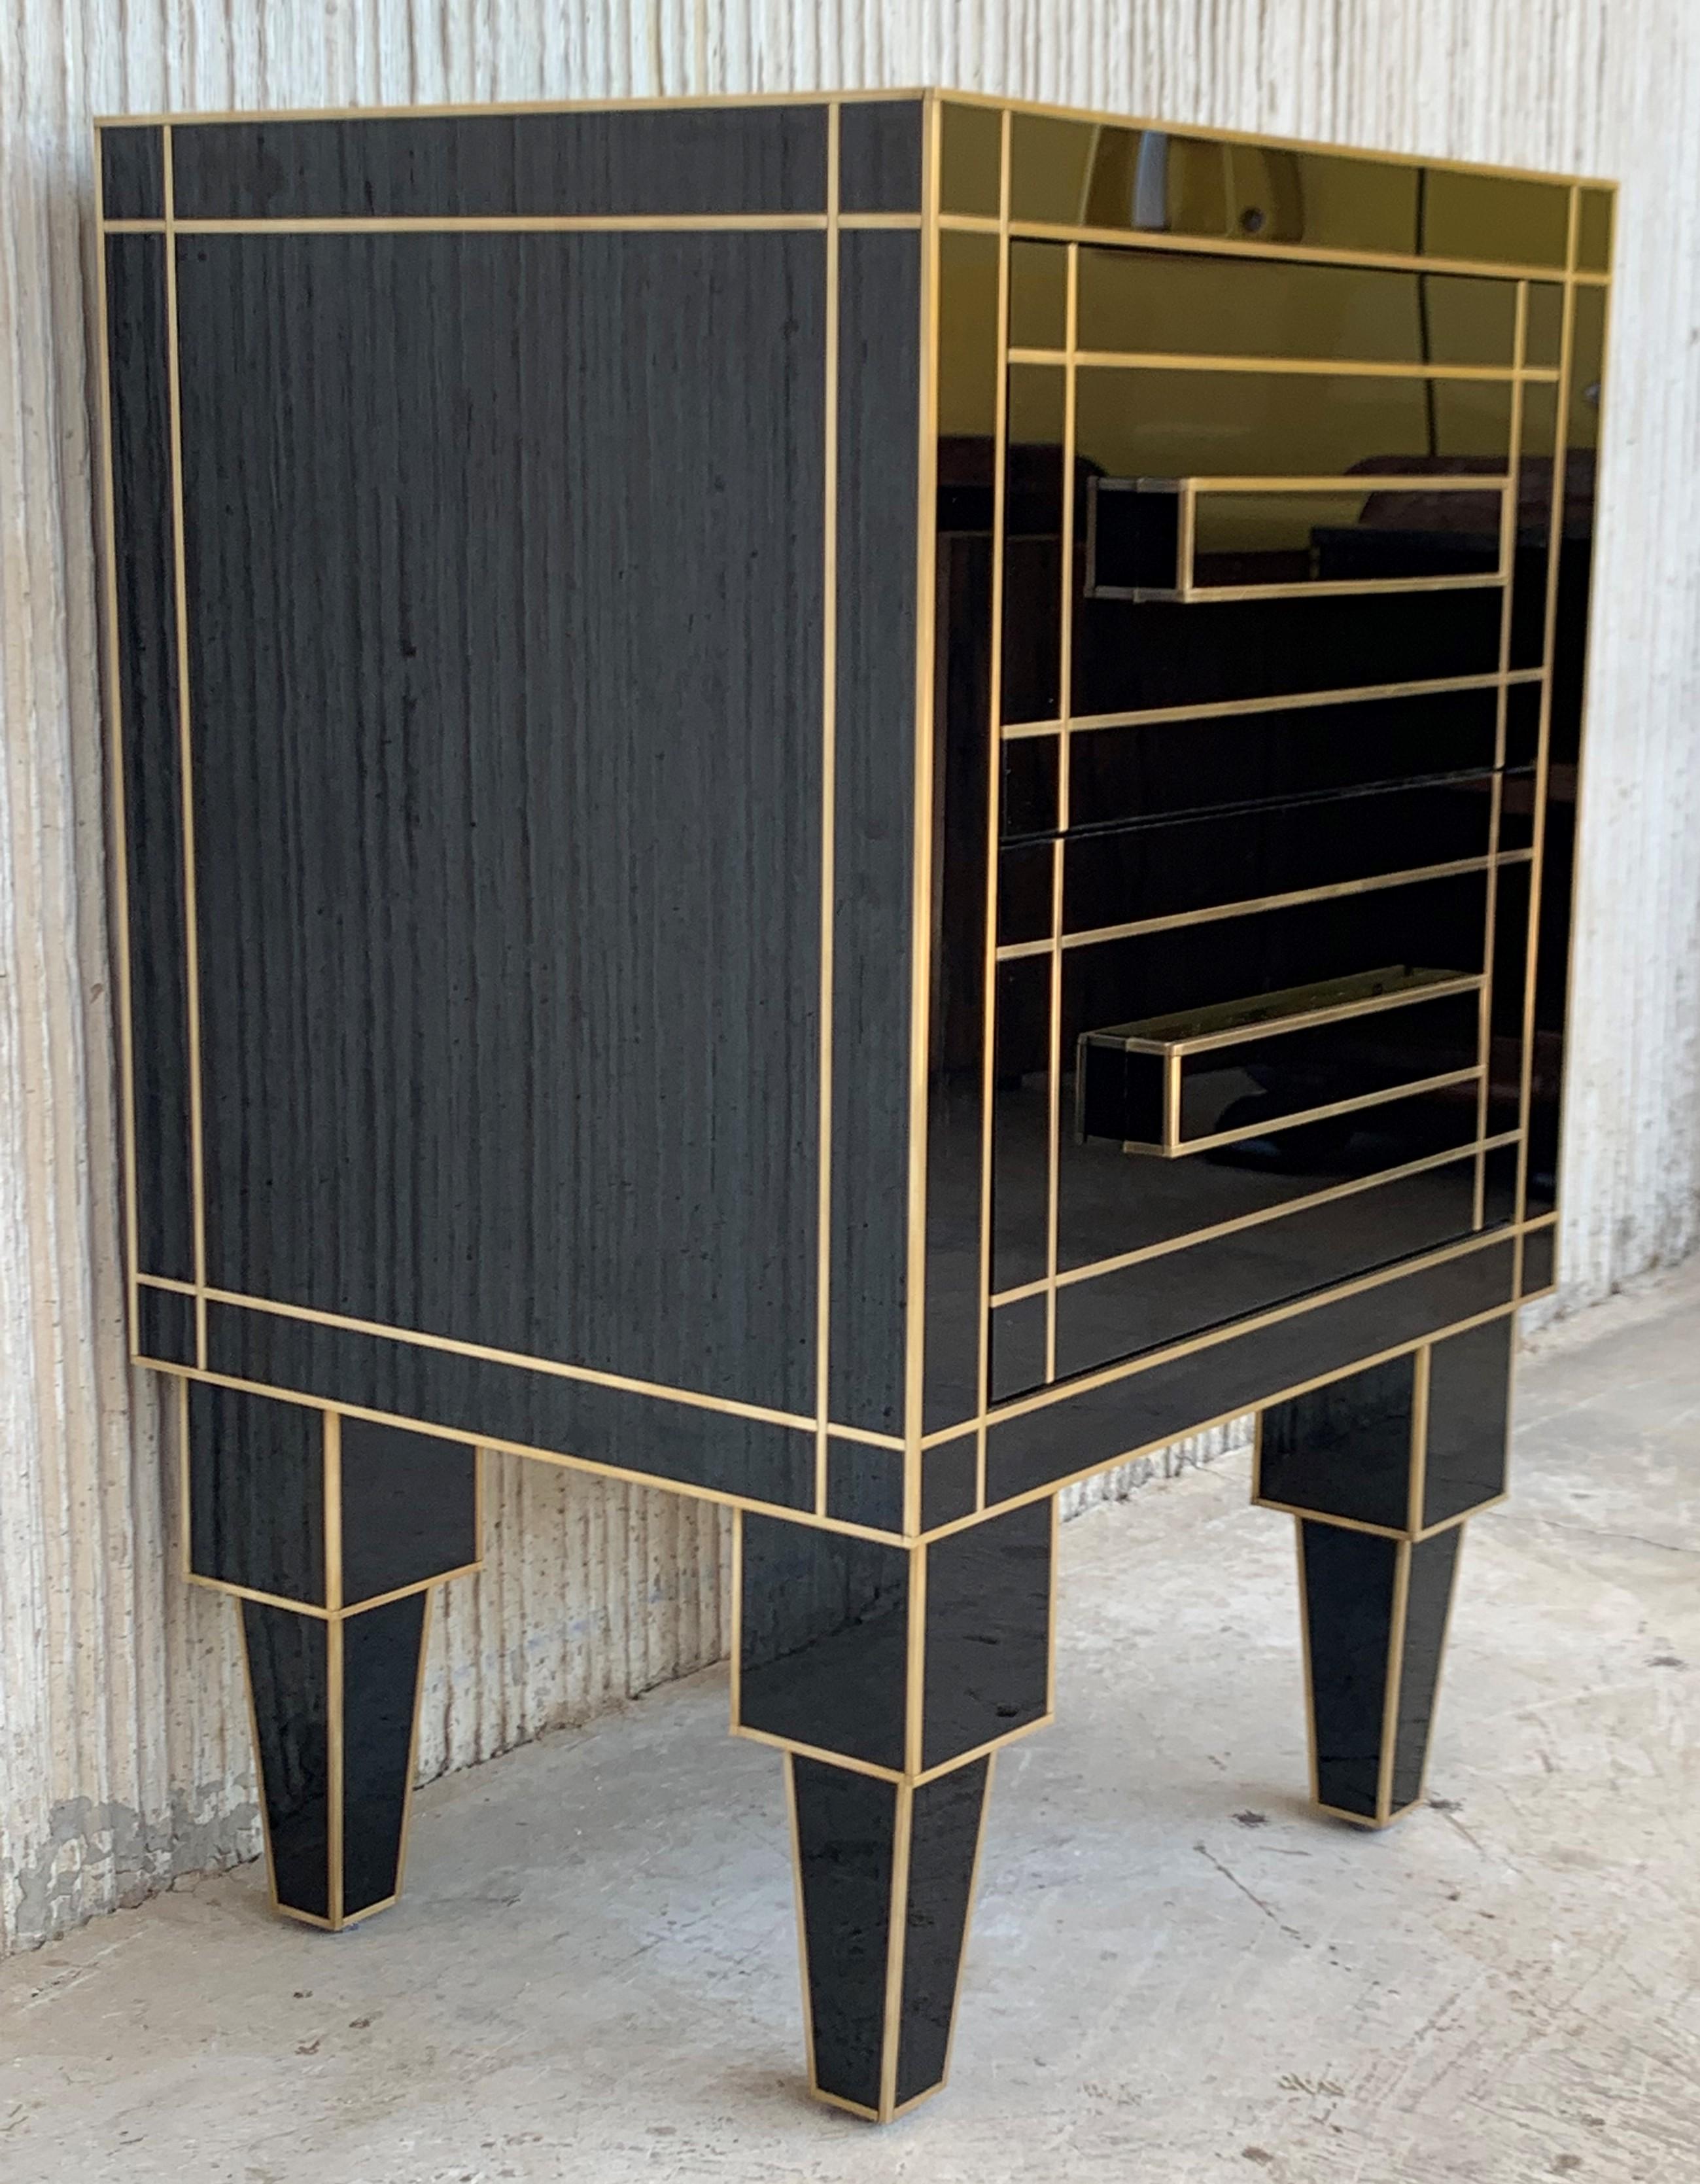 Spanish New Pair of Mirrored Nightstands in Black Mirror with Two Drawers